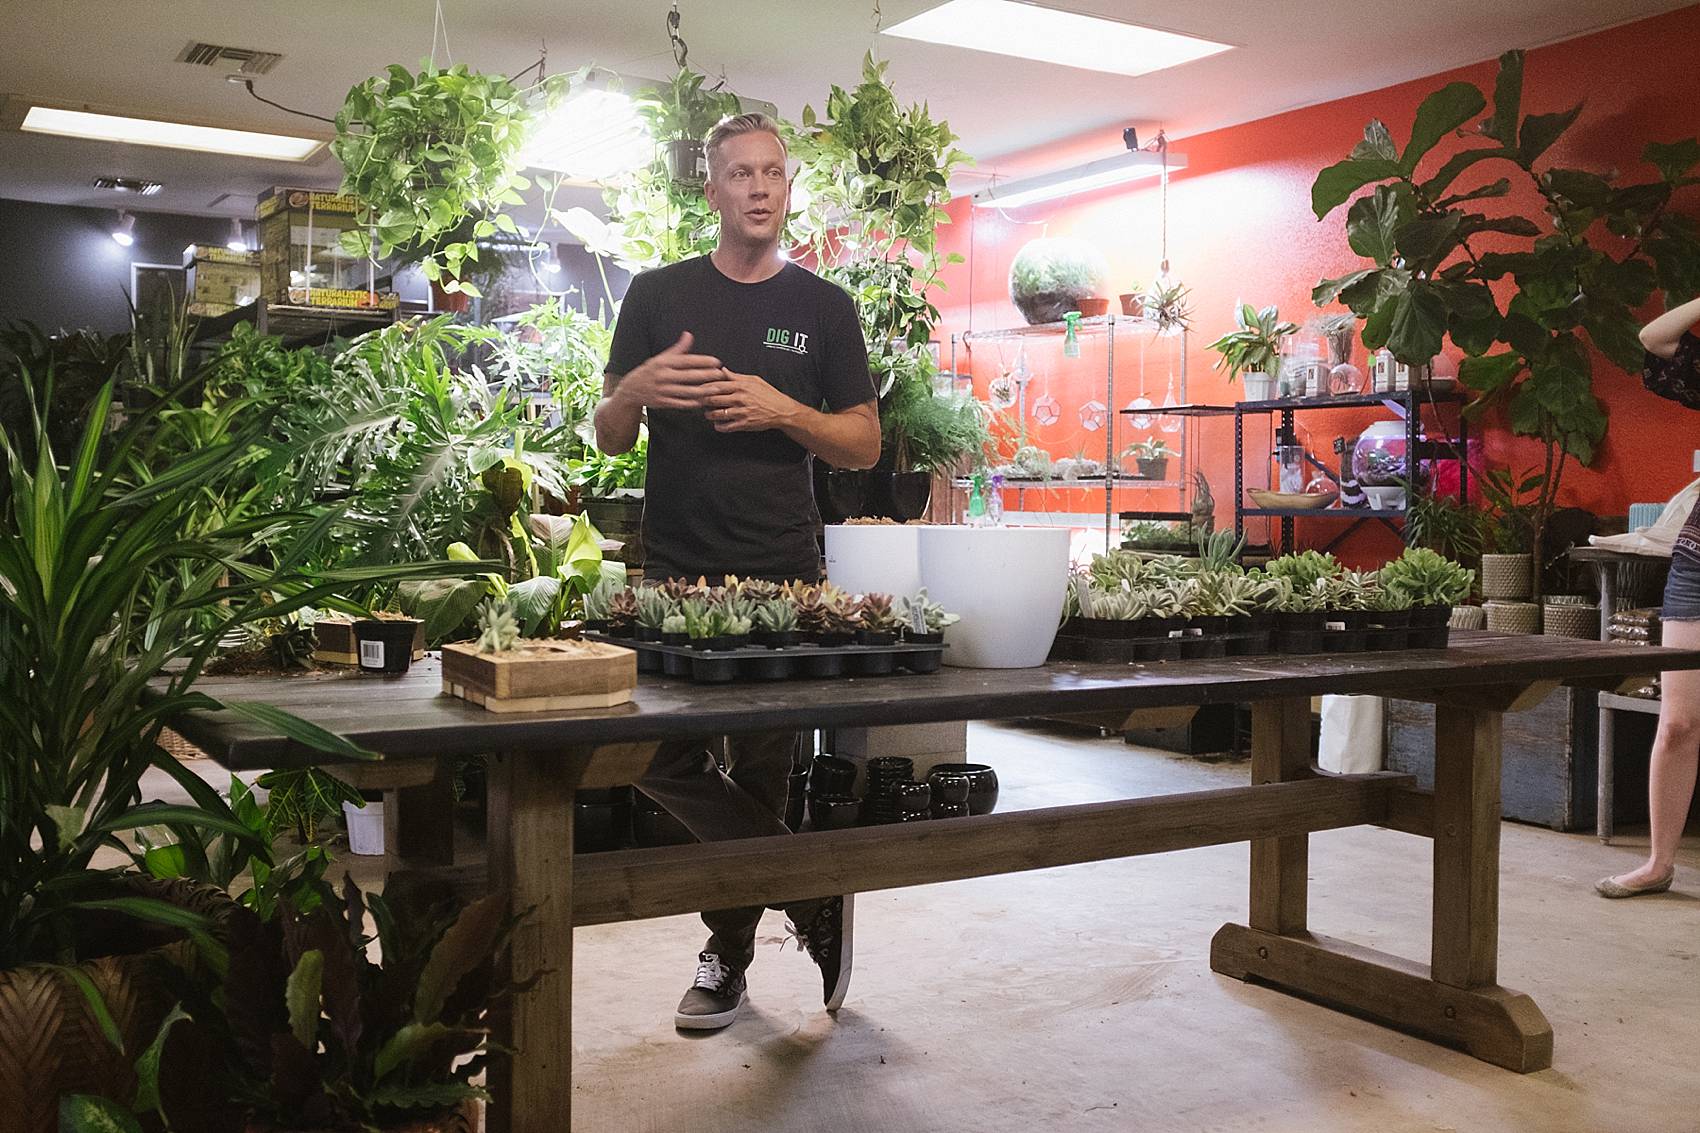 owner of grow it in phoenix a nursery explaining how to take care of succulents standing behind a table giving presentation 